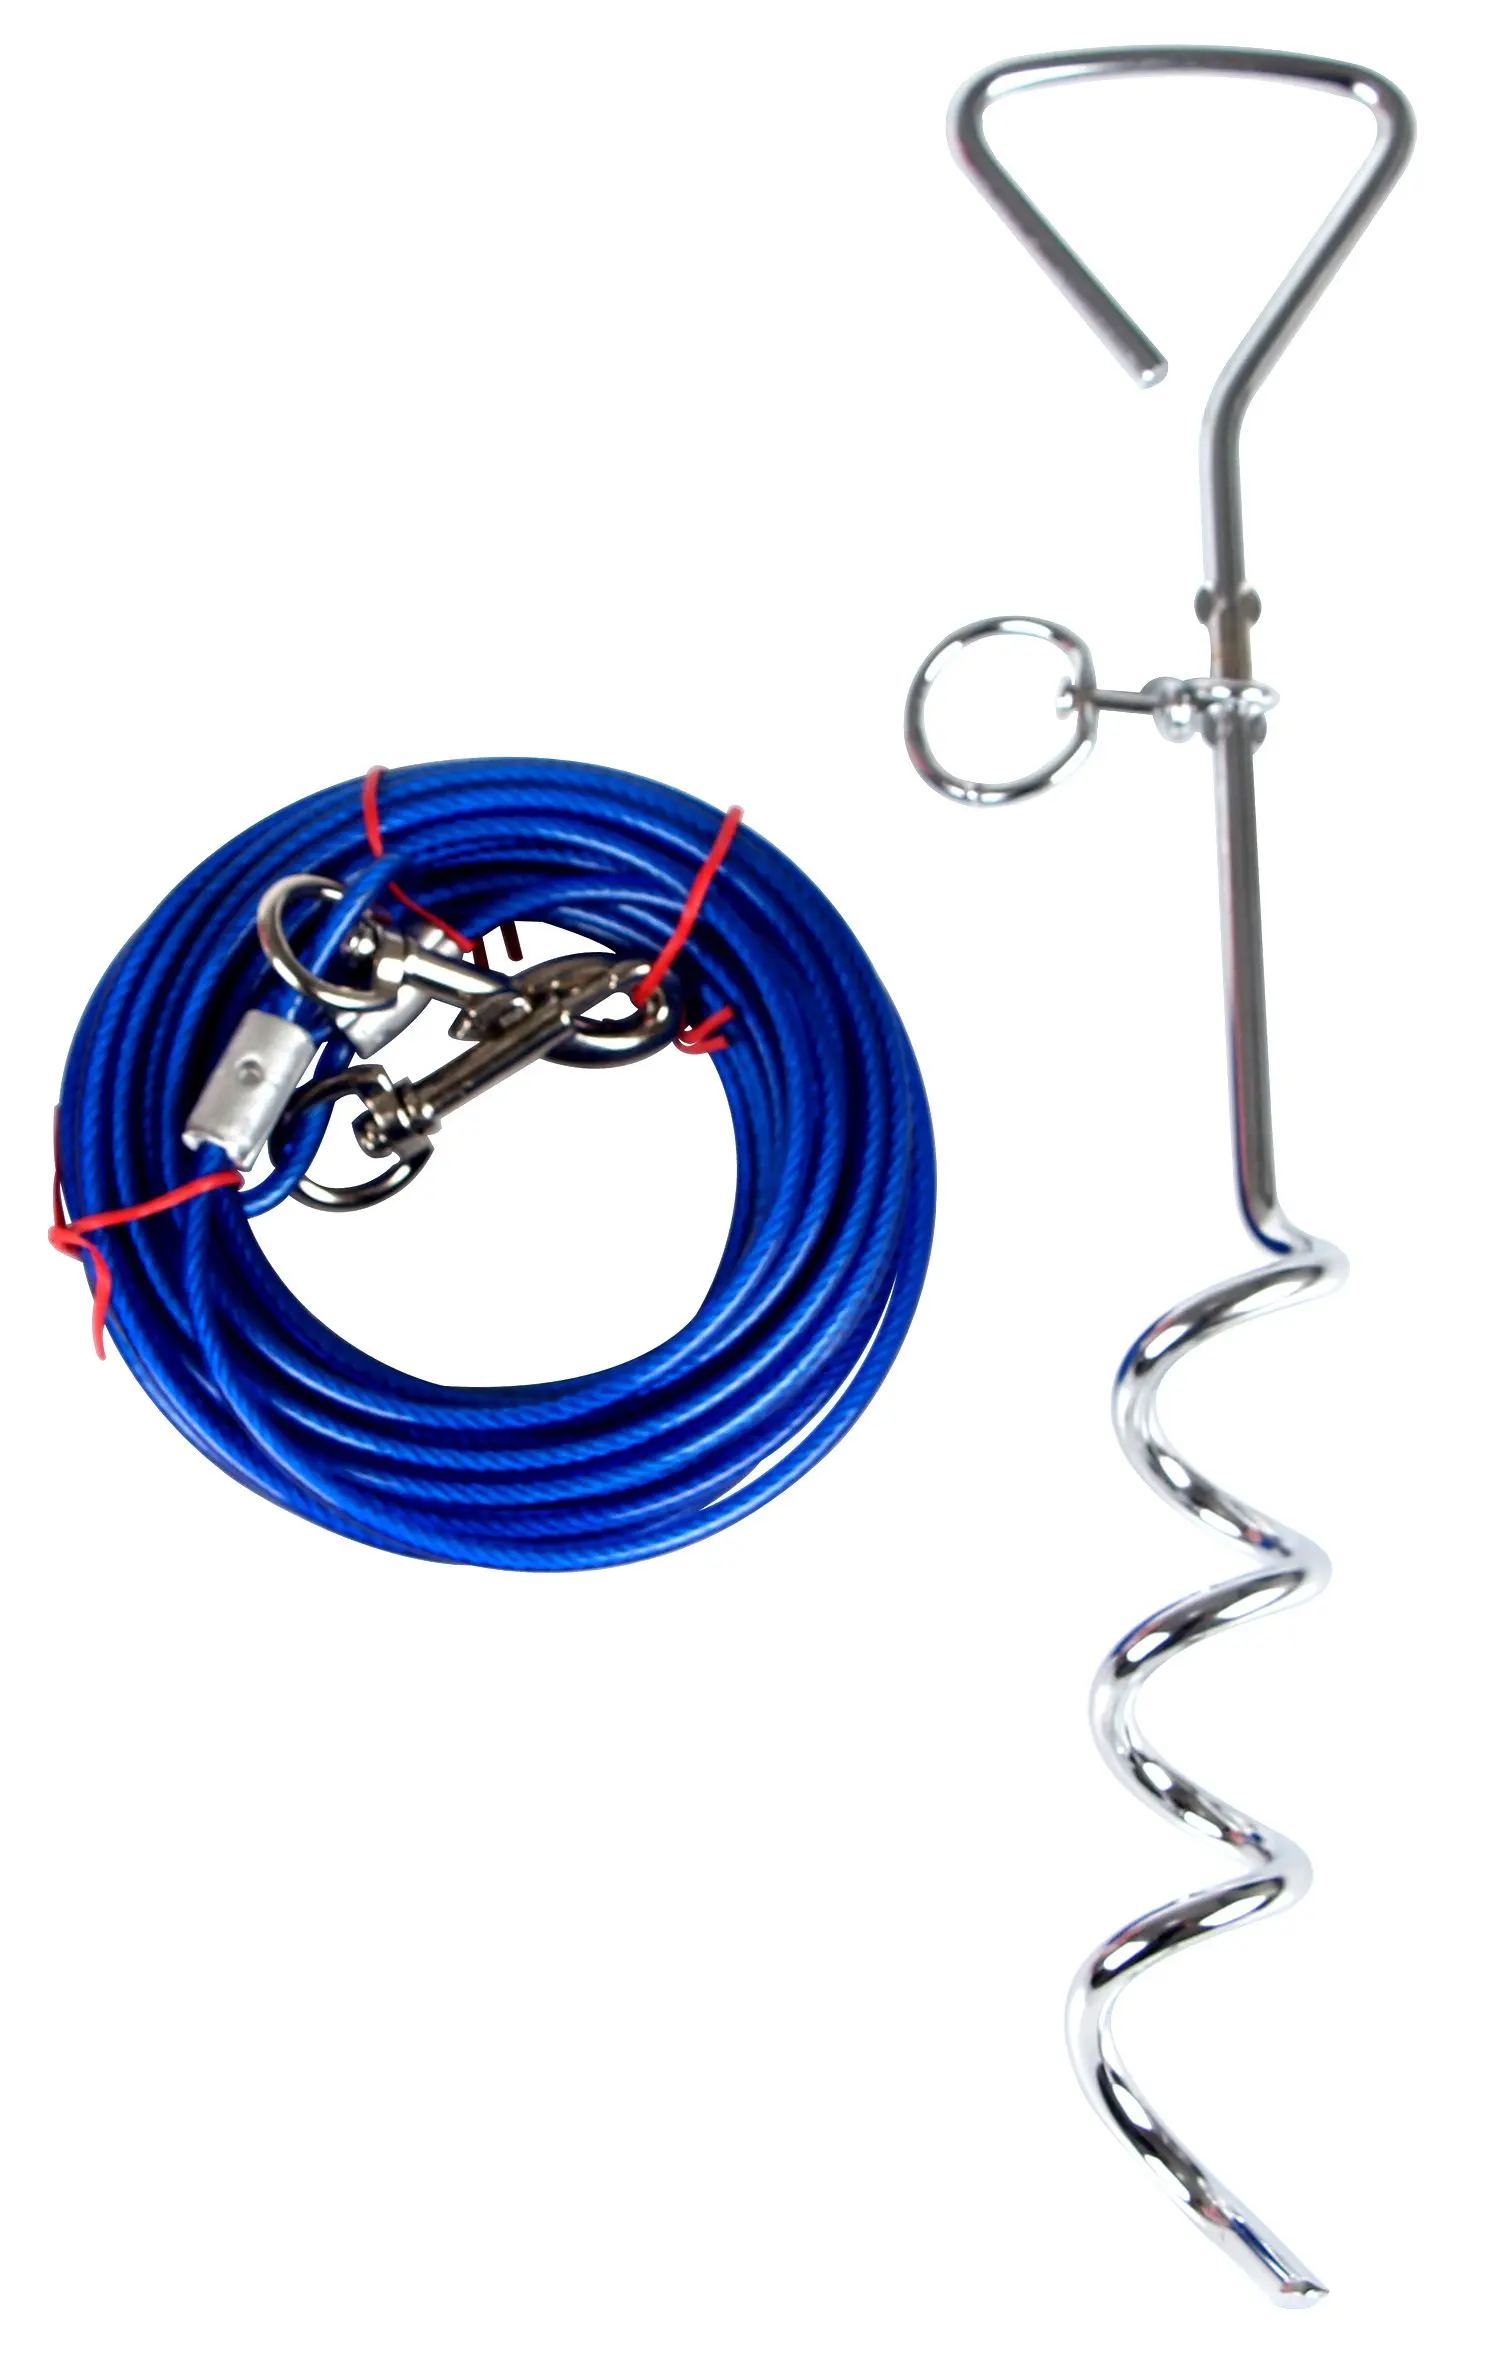 Zinco Dog tie-Out Spiral Stake Comes with a 10 feet Double connectors Vinyl Coated Galvanized Cable. 18 inch Long manually Screwed in The Ground Will Prevents Pulling Out and Bending